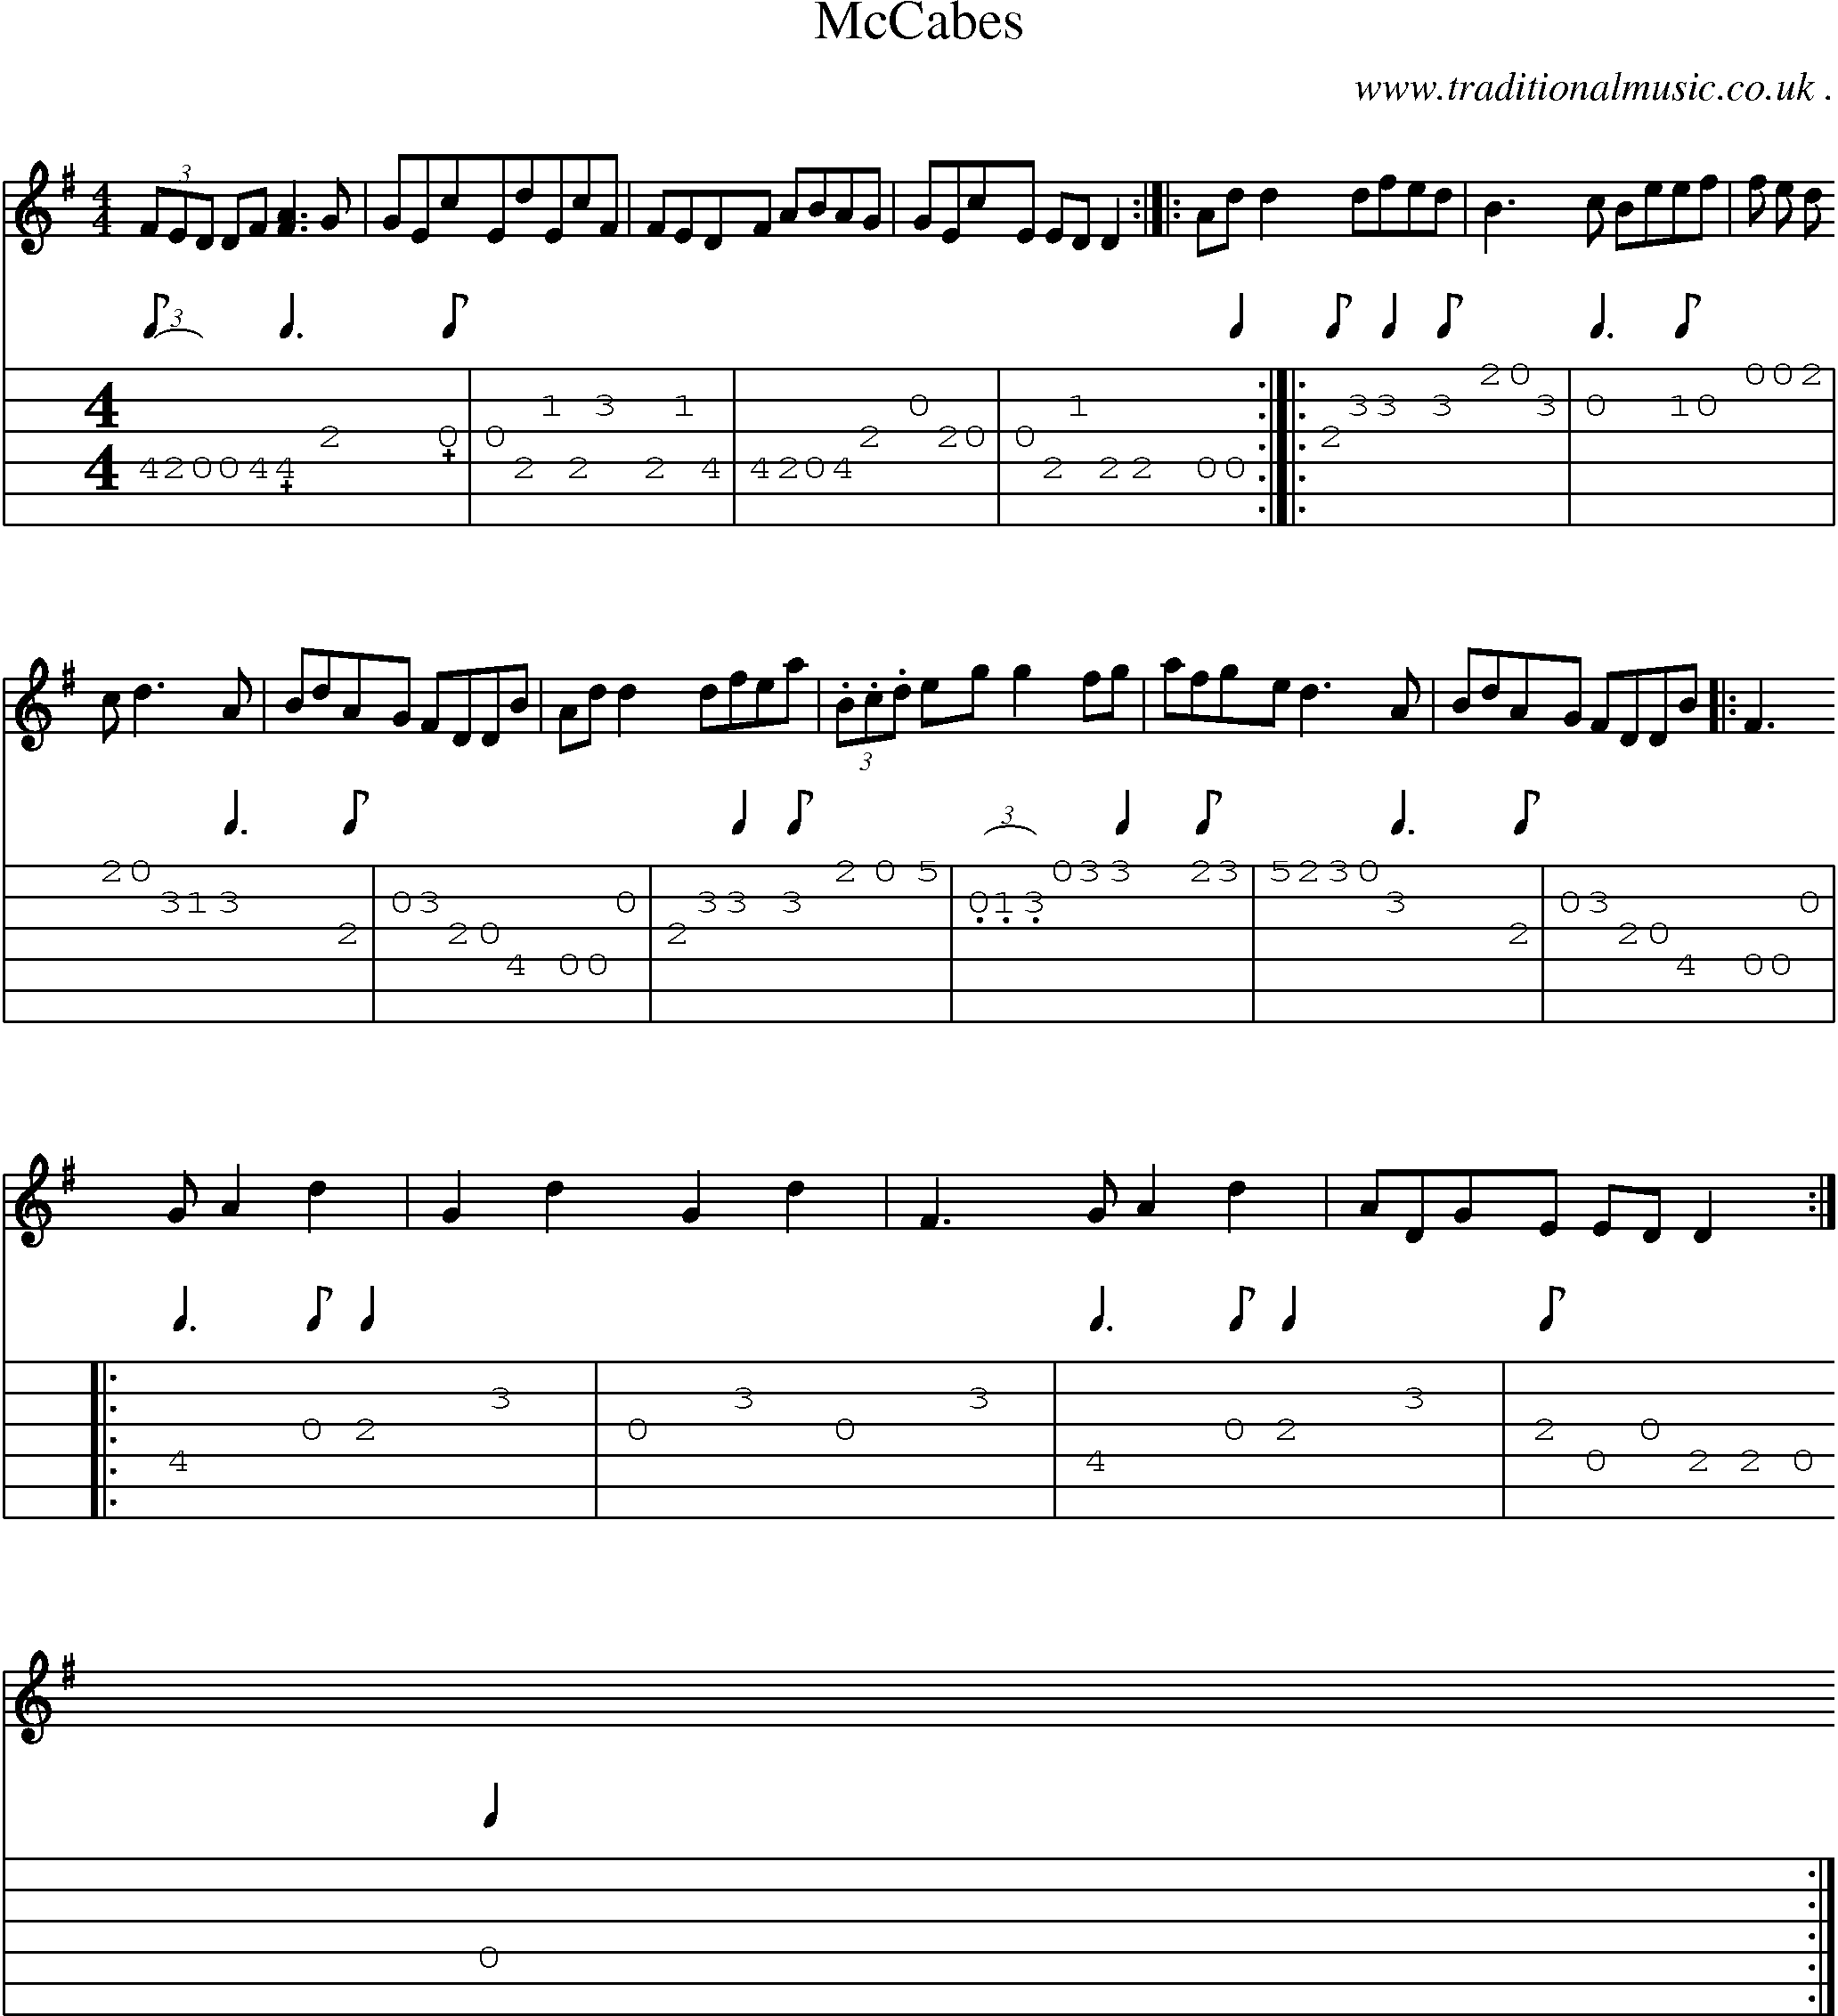 Sheet-Music and Guitar Tabs for Mccabes